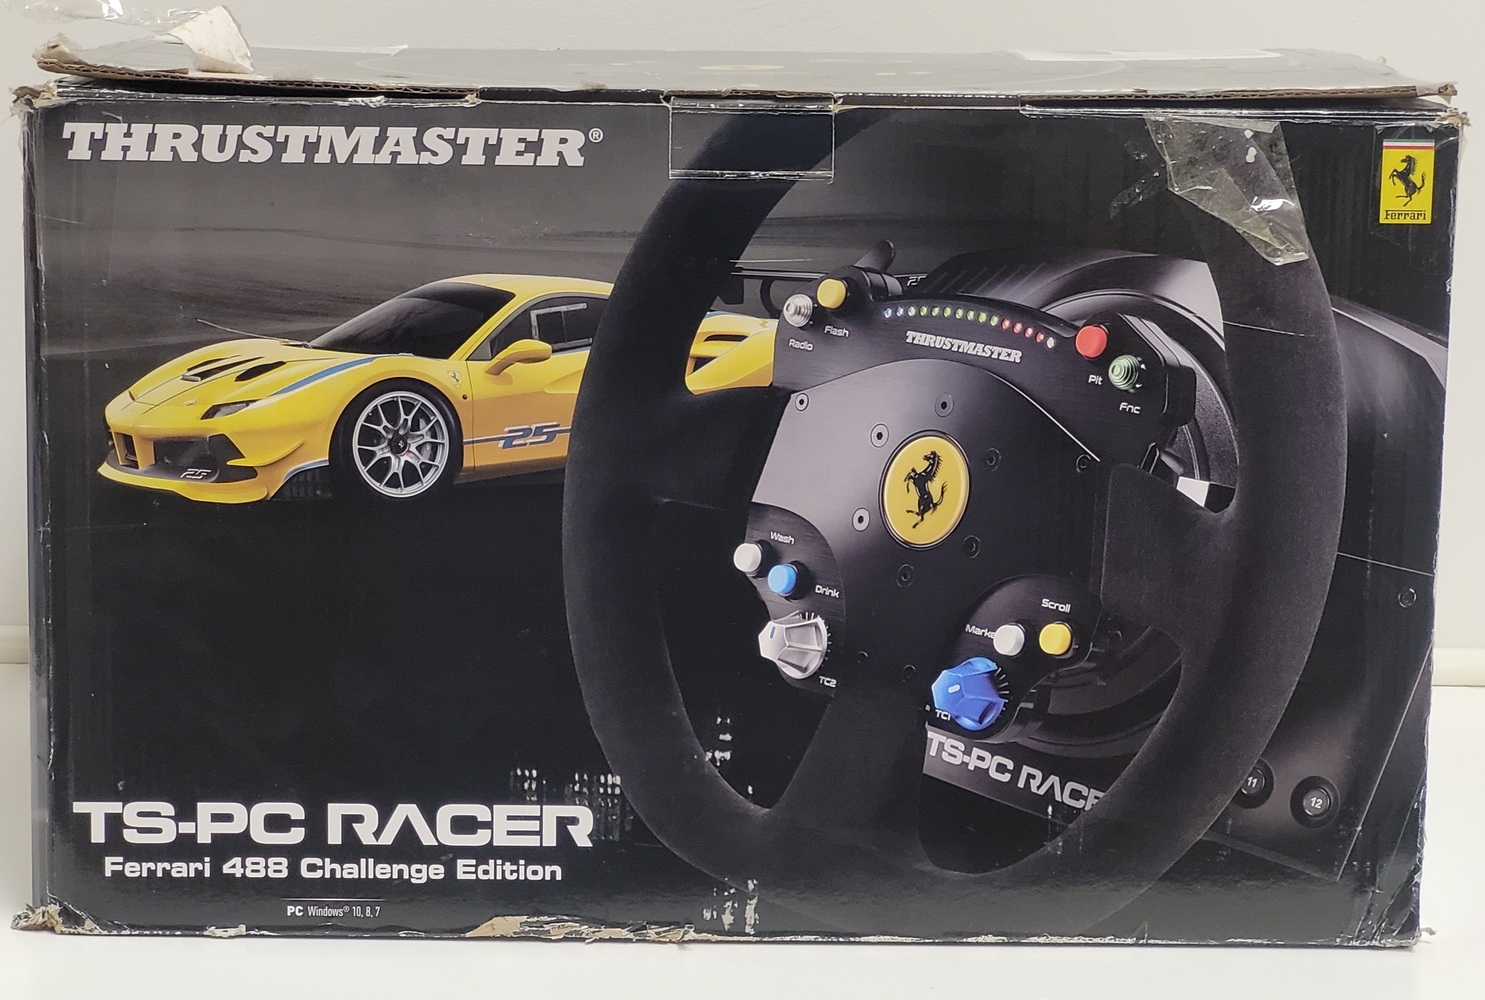 Thrustmaster TS-PC Racer 488 Challenge ED - Volants gaming